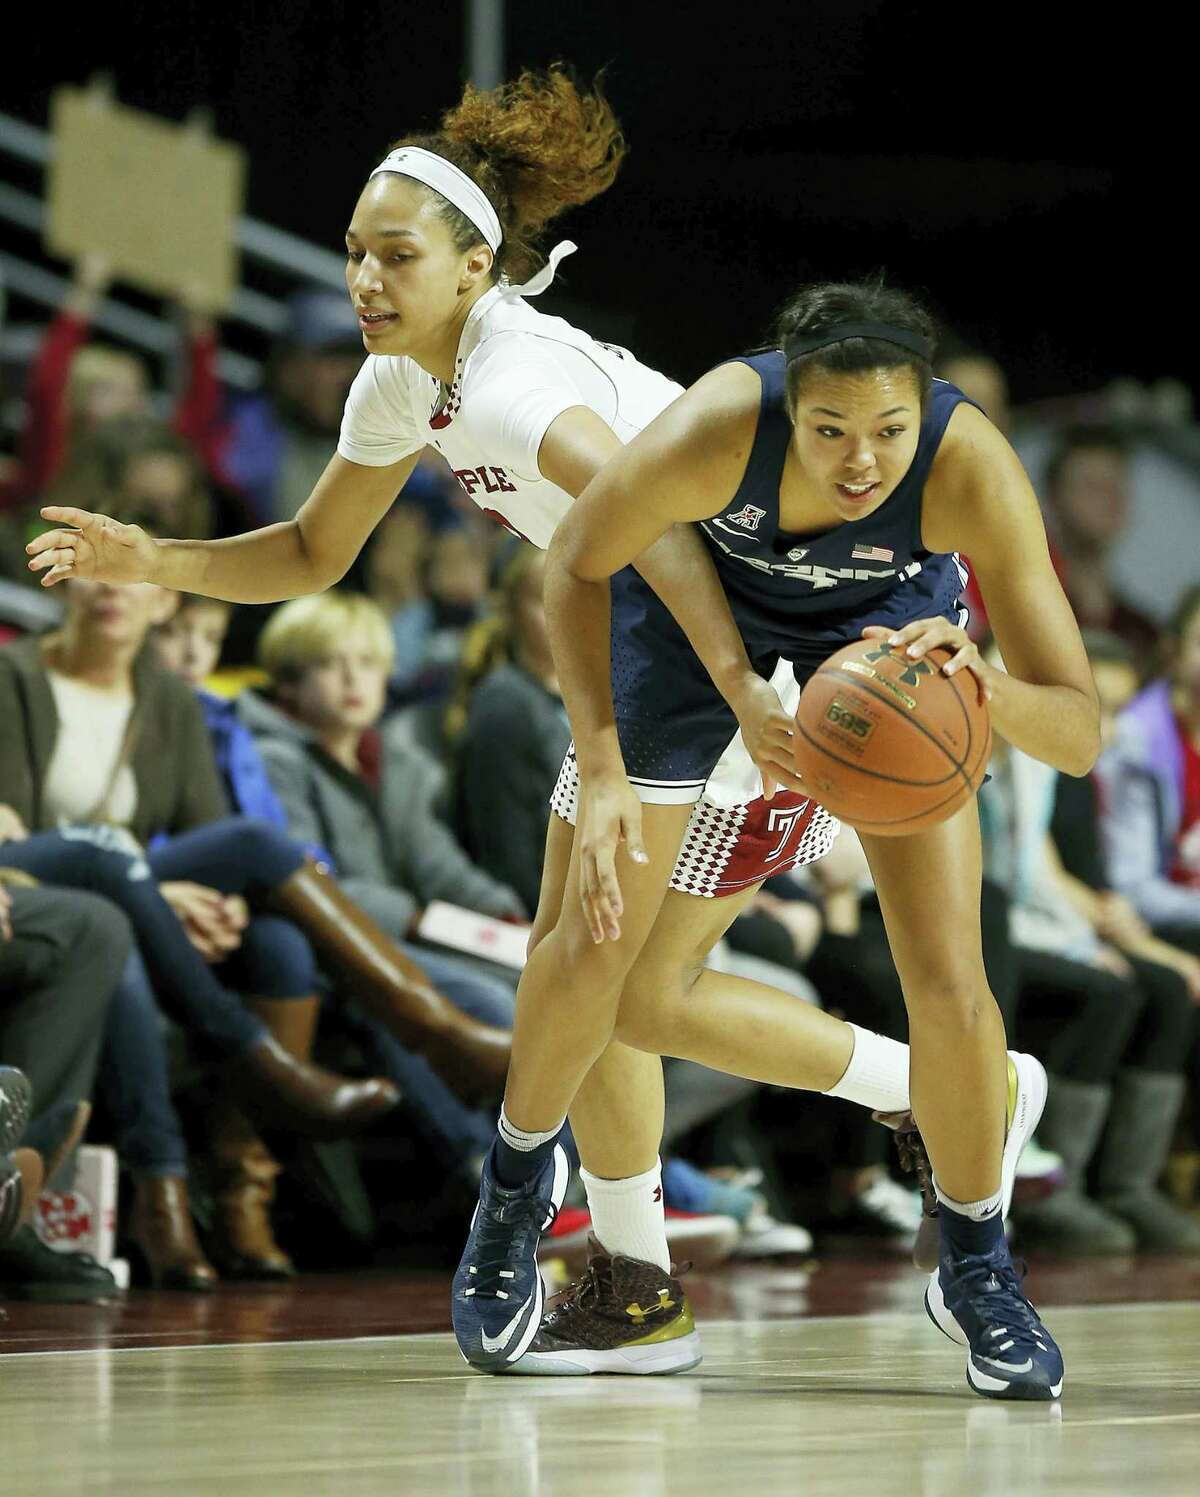 UConn forward Napheesa Collier steals the basketball from Temple forward Ruth Sherrill during Wednesday’s game.